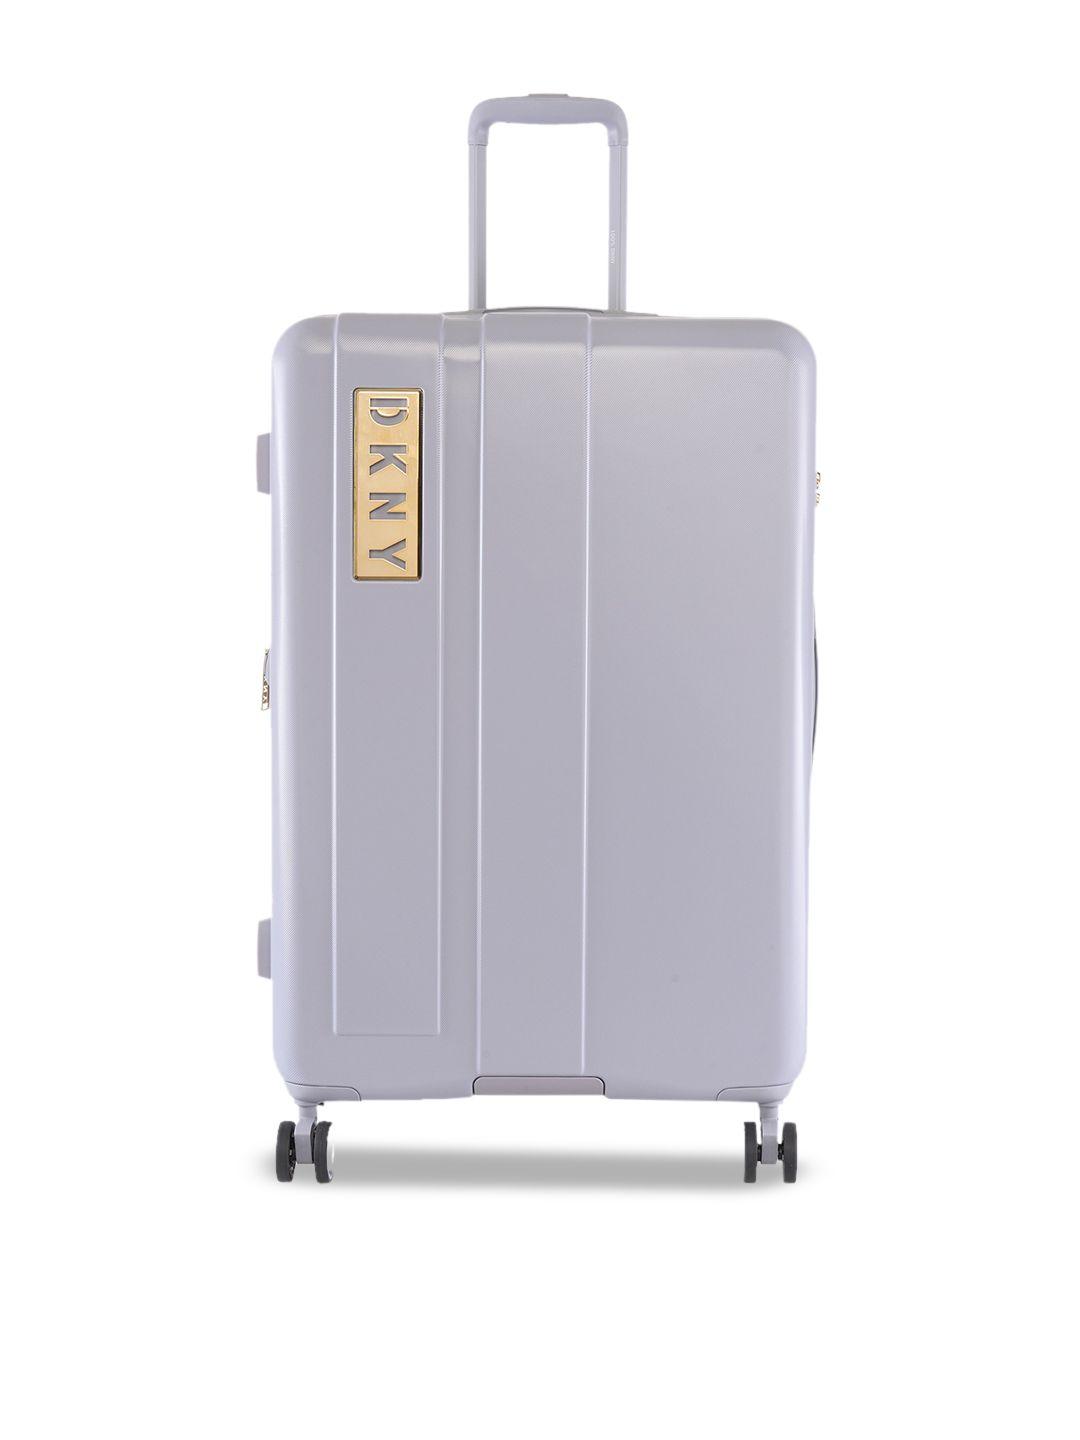 dkny textured hard-sided large trolley suitcase